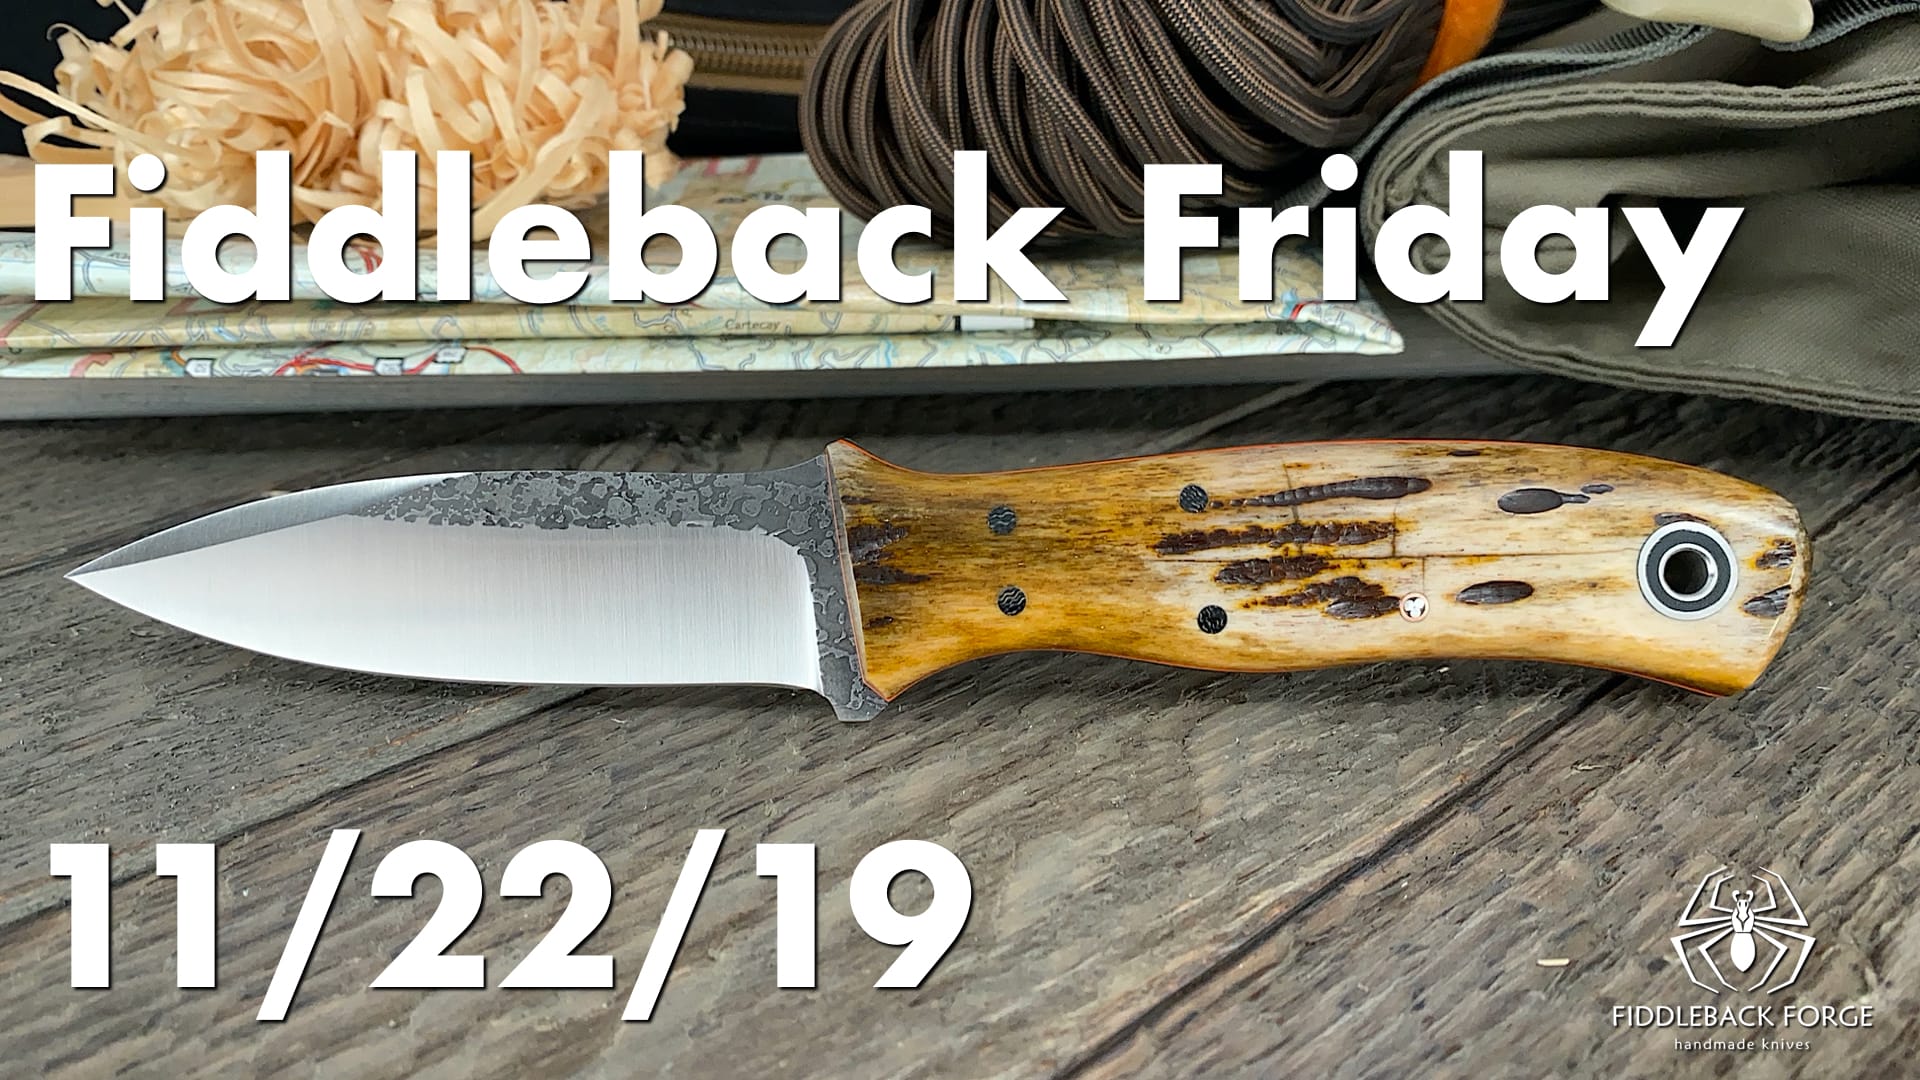 Fiddleback Friday 11/22/19 - Video Preview